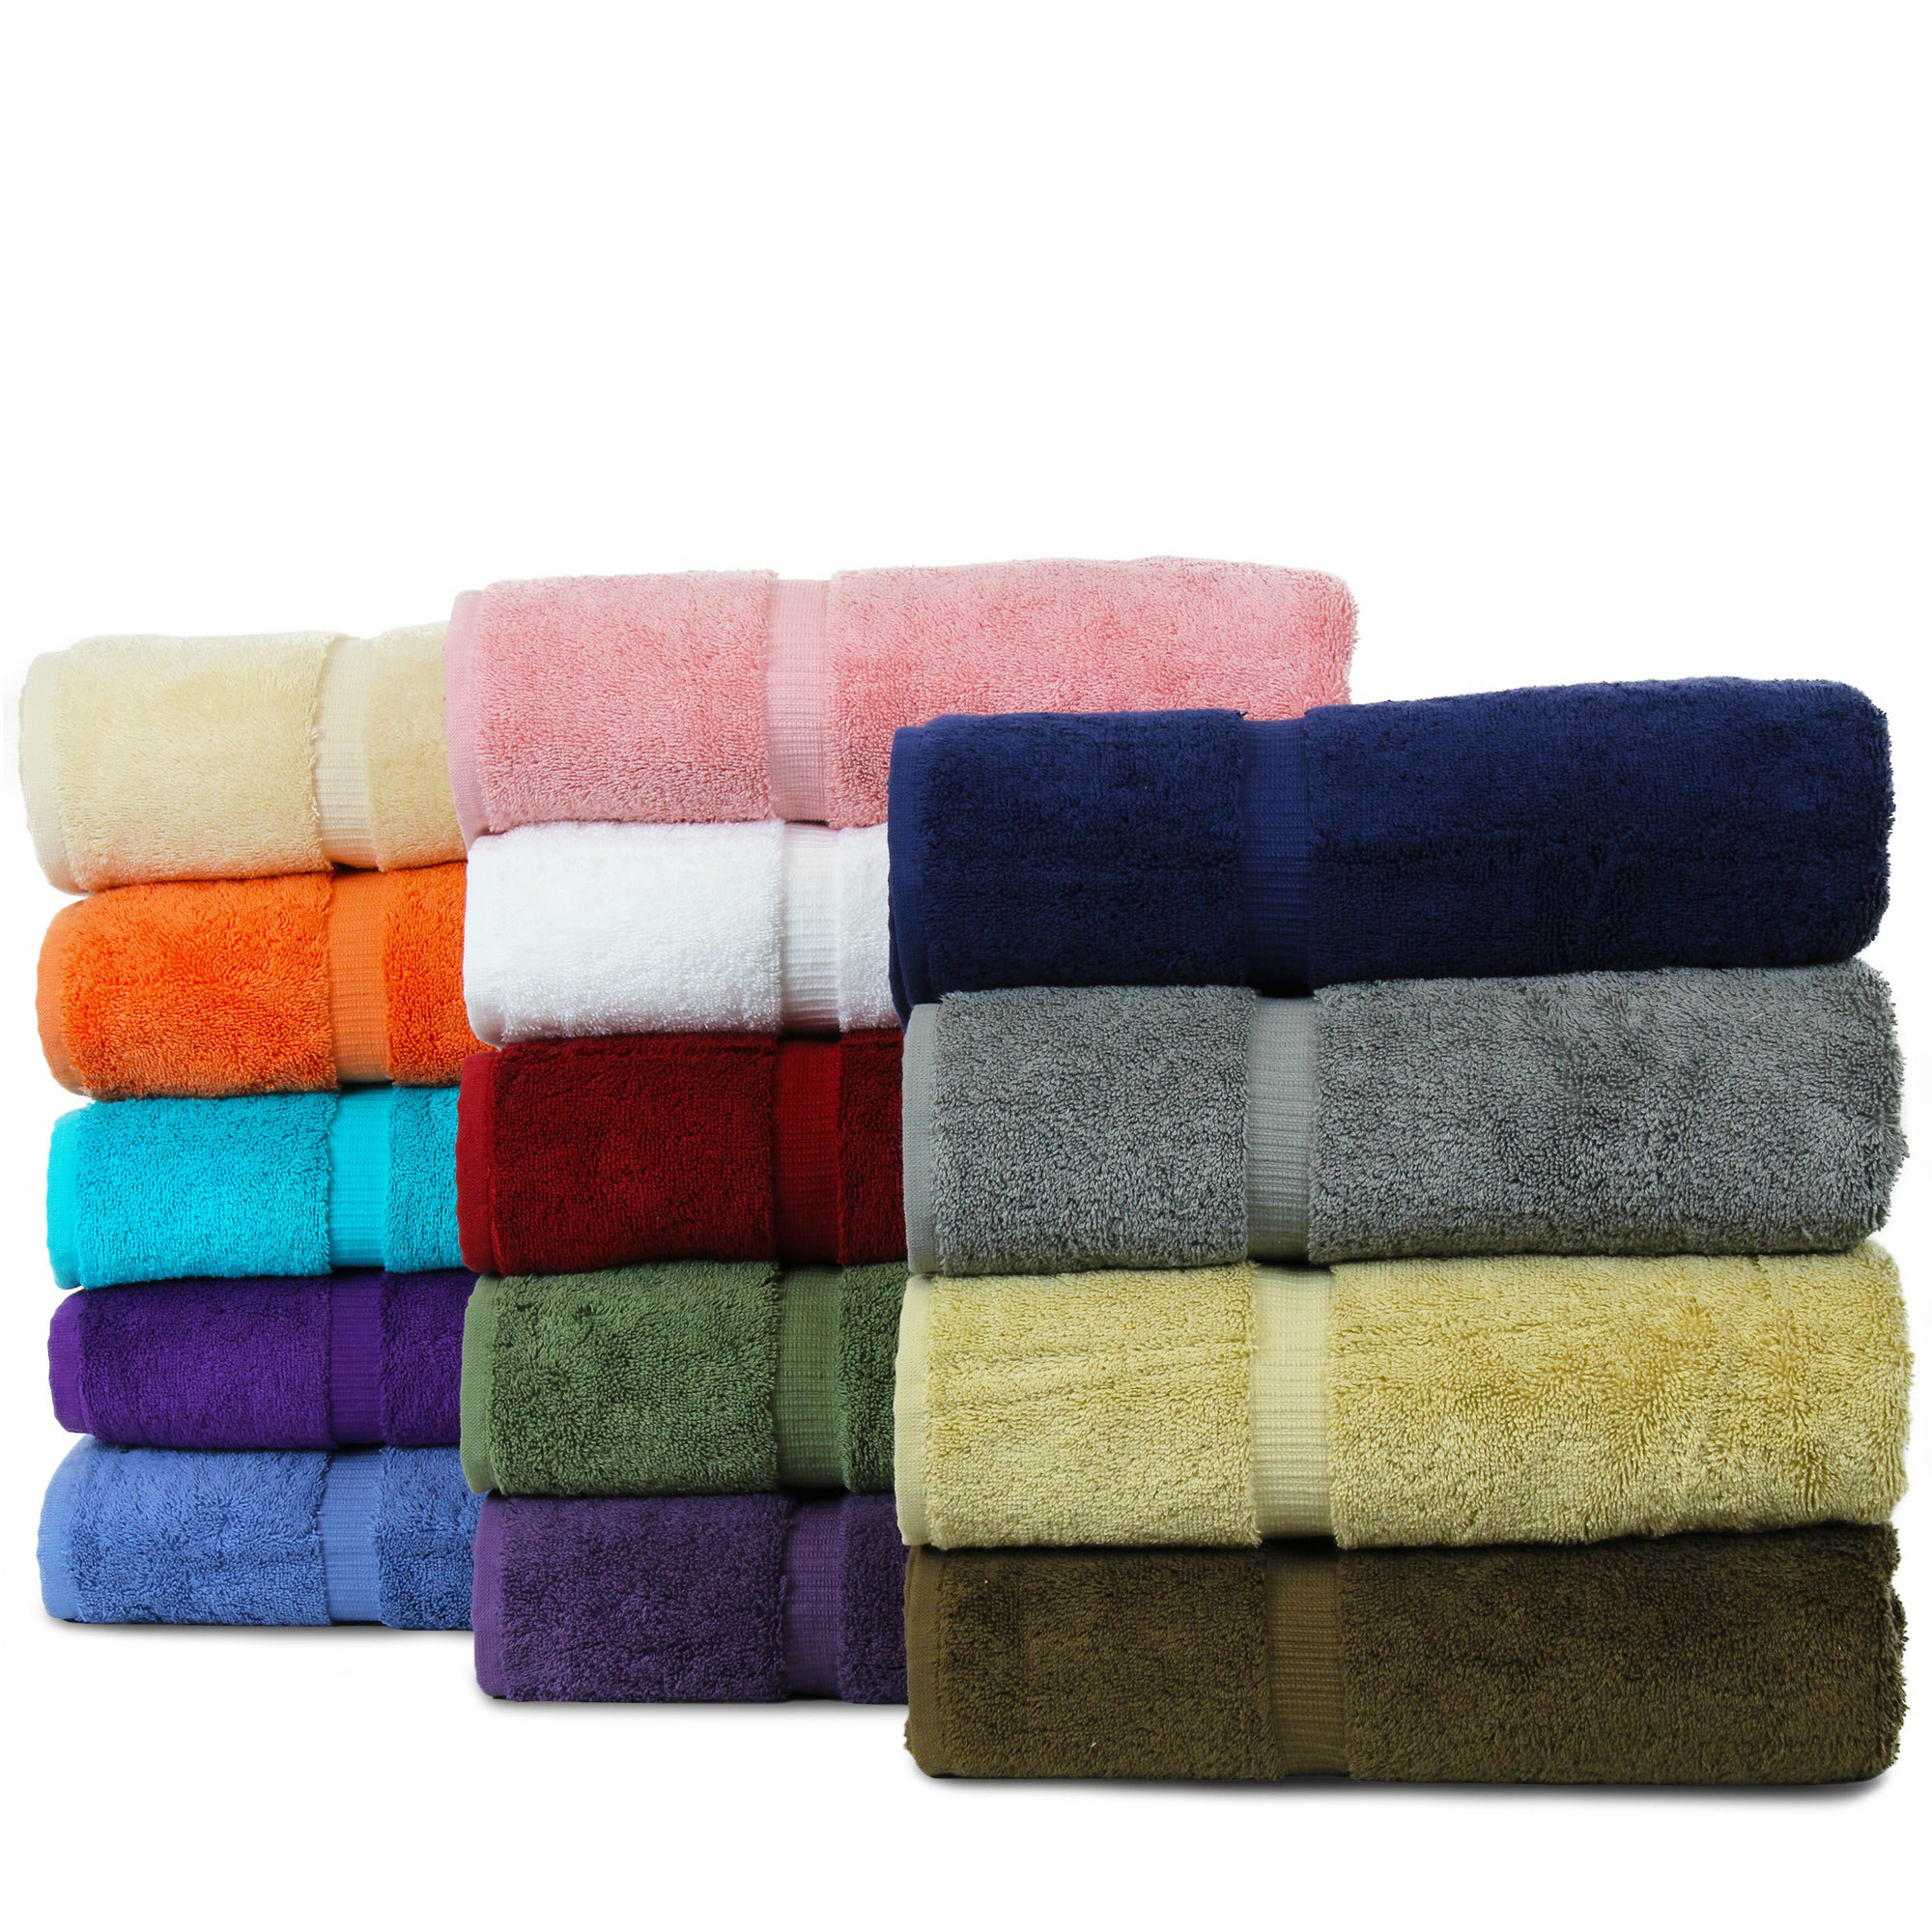 Cotton Washcloths Absorbent Body and Face Towels - 12 Pieces - Multicolor